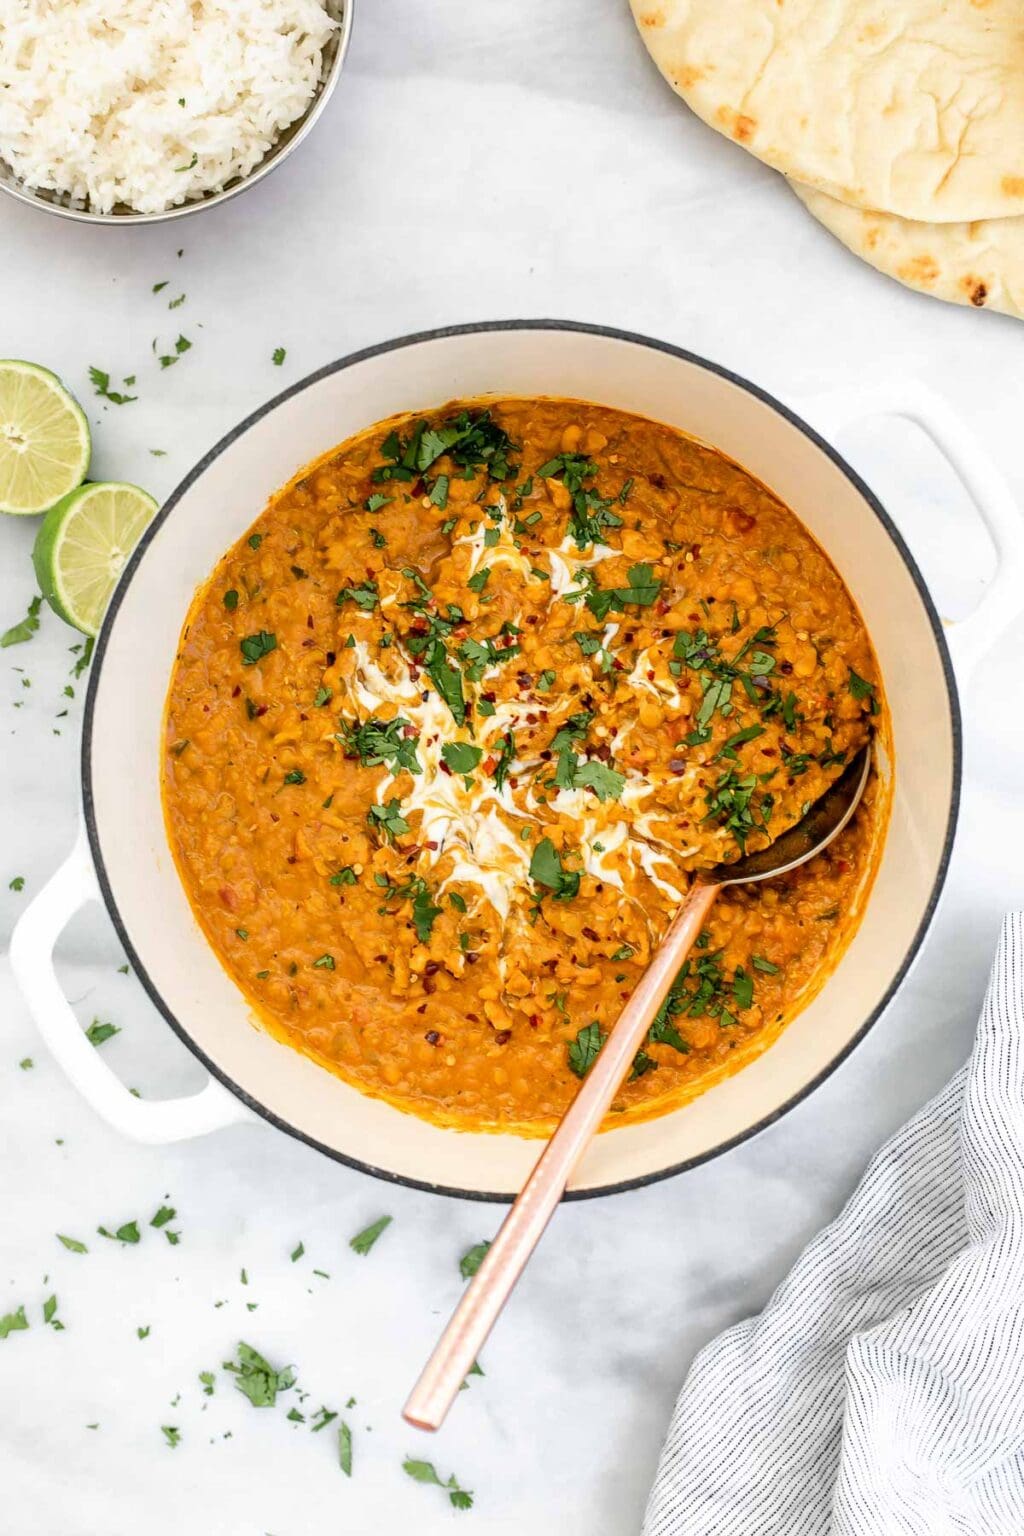 Best Vegan Red Lentil Curry - Eat With Clarity